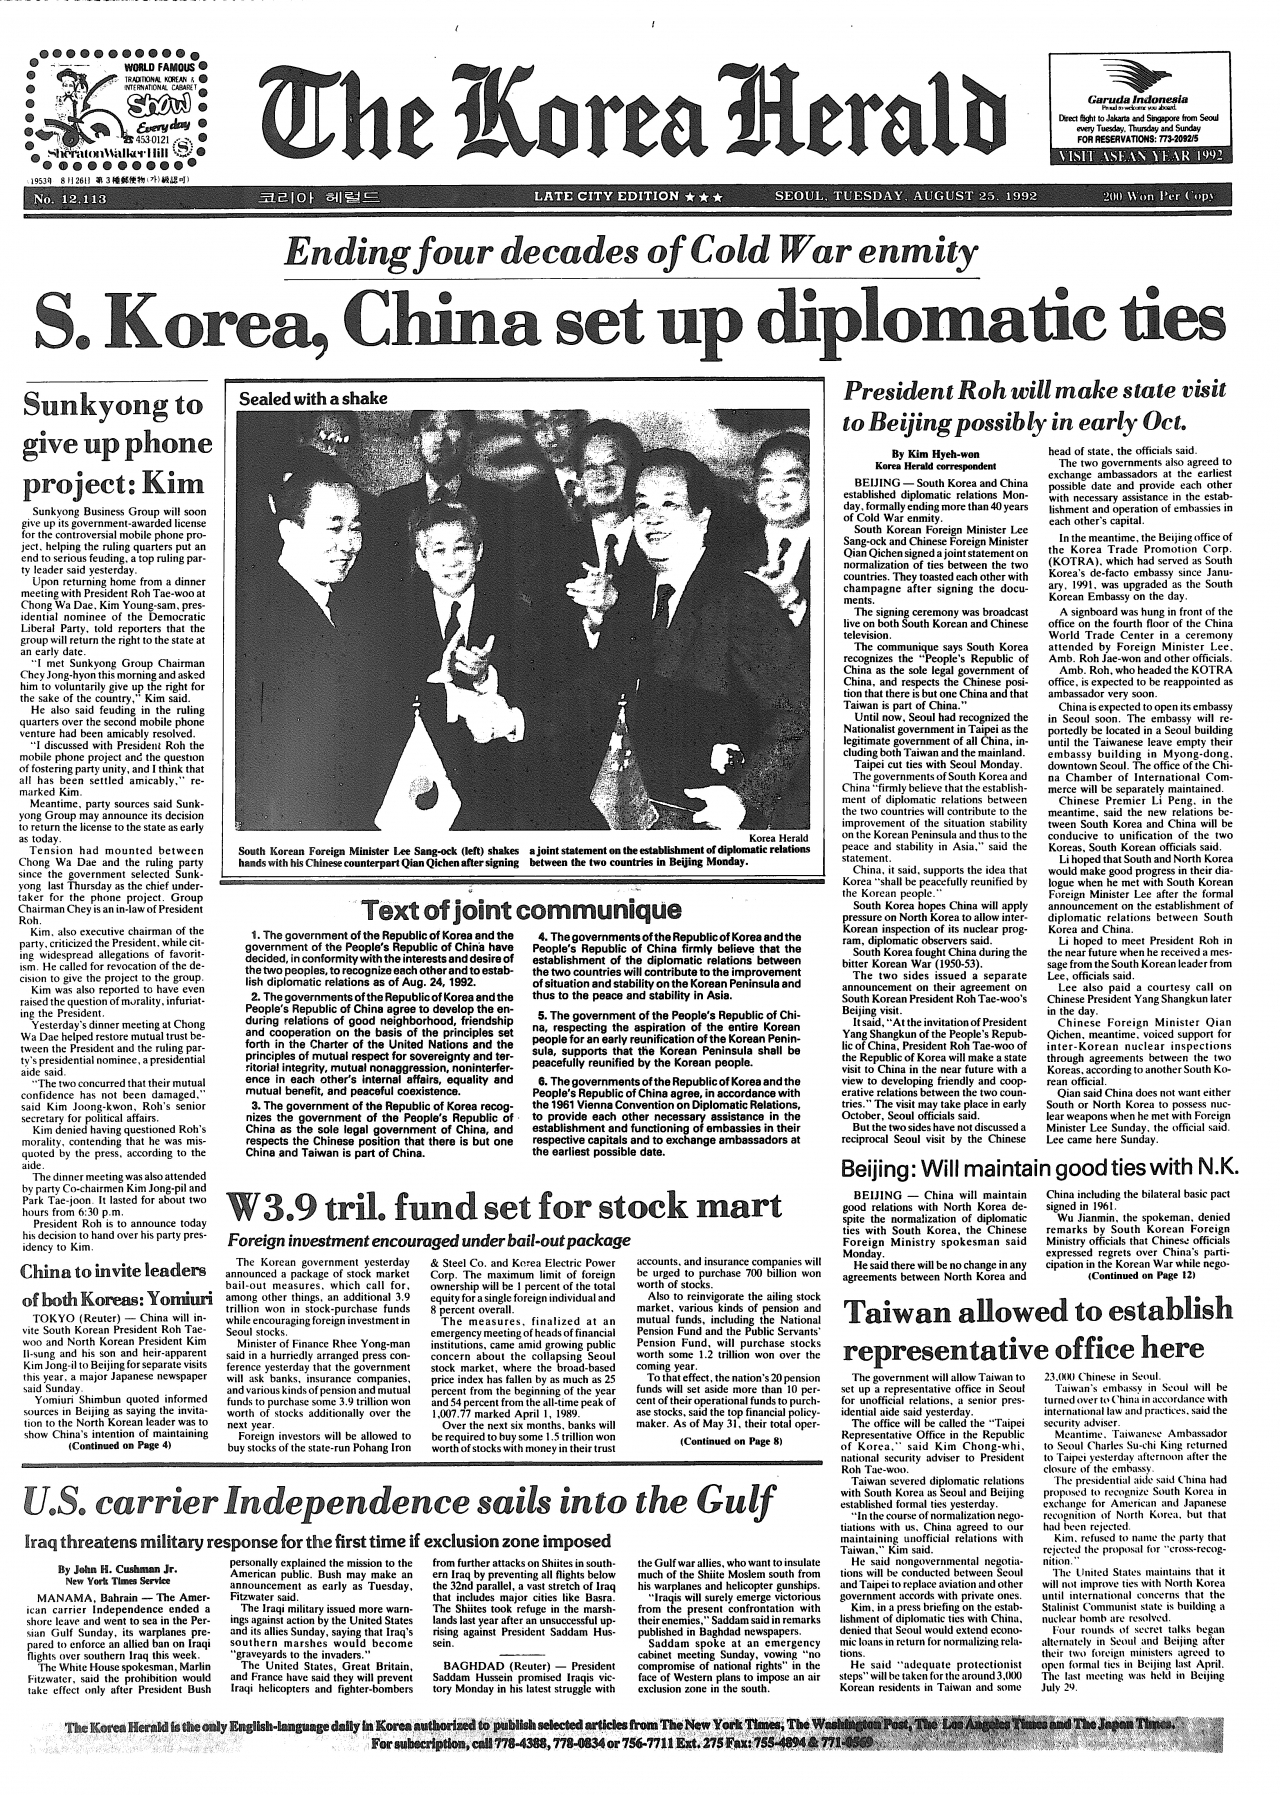 The Aug. 25, 1992 issue of The Korea Herald